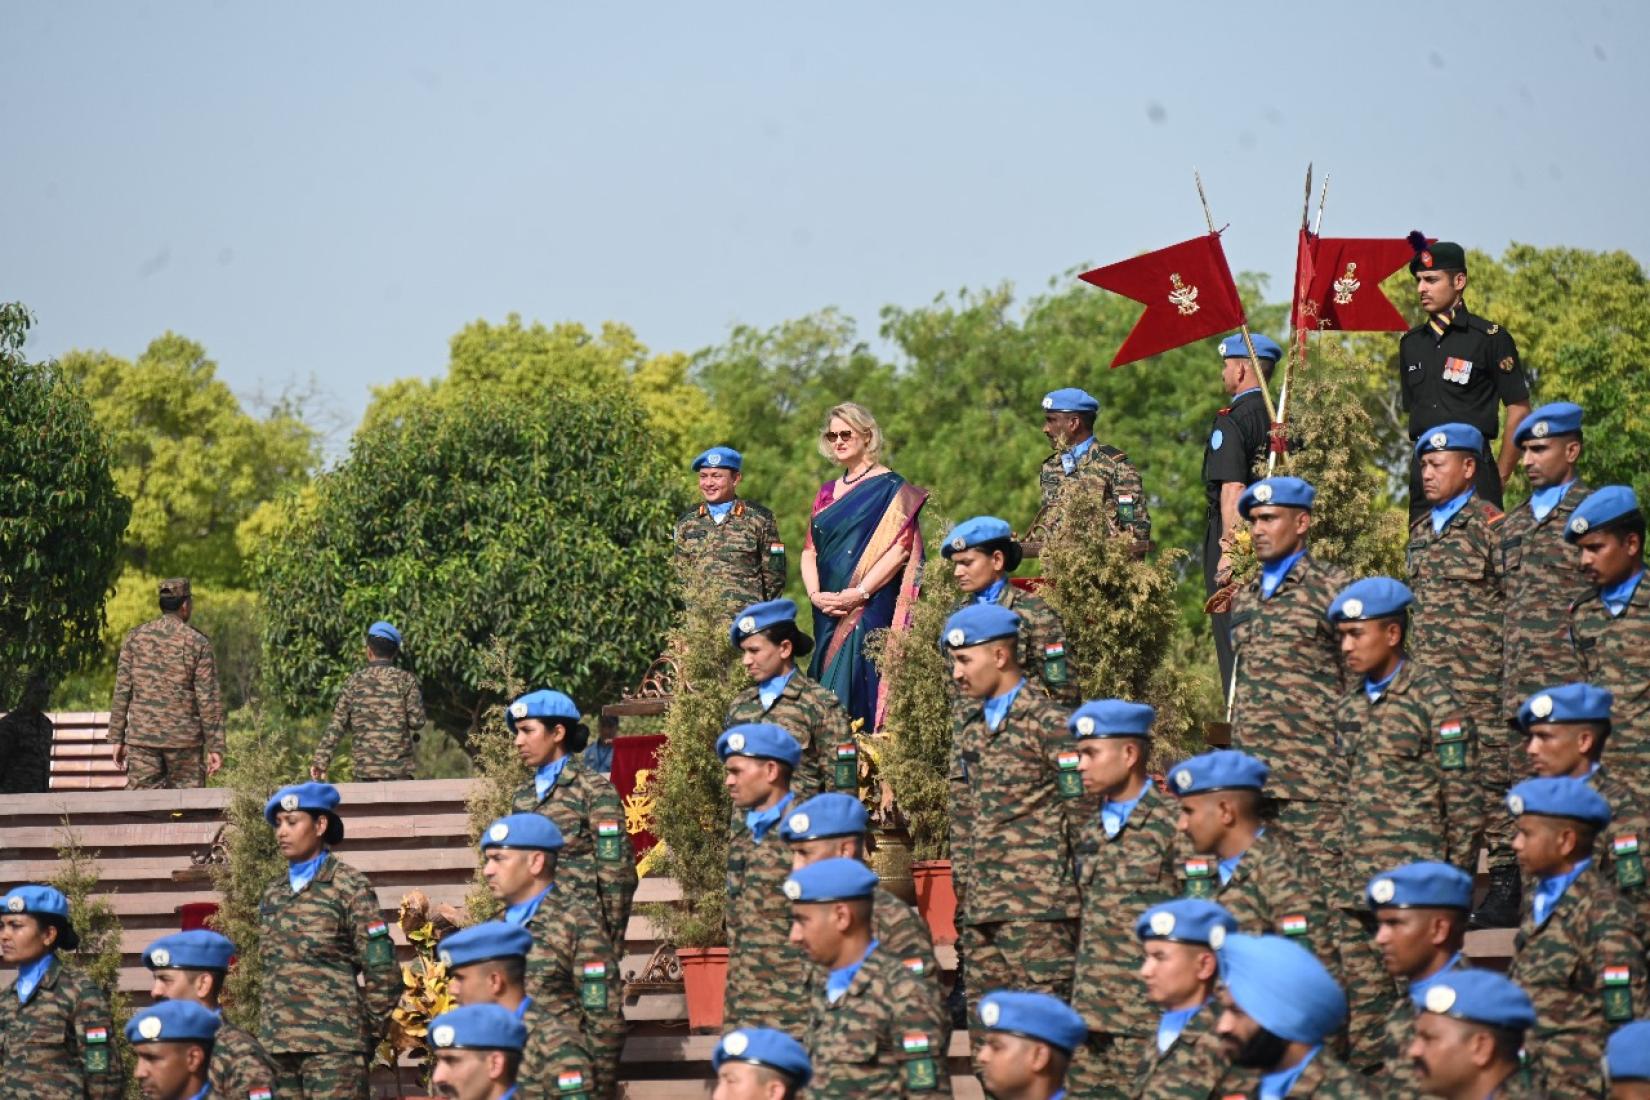 “We honour peacekeepers and all those who work towards the highest human aspiration: peace in this world,” United Nations Resident Coordinator in India ad interim Andrea Wojnar said at the commemoration